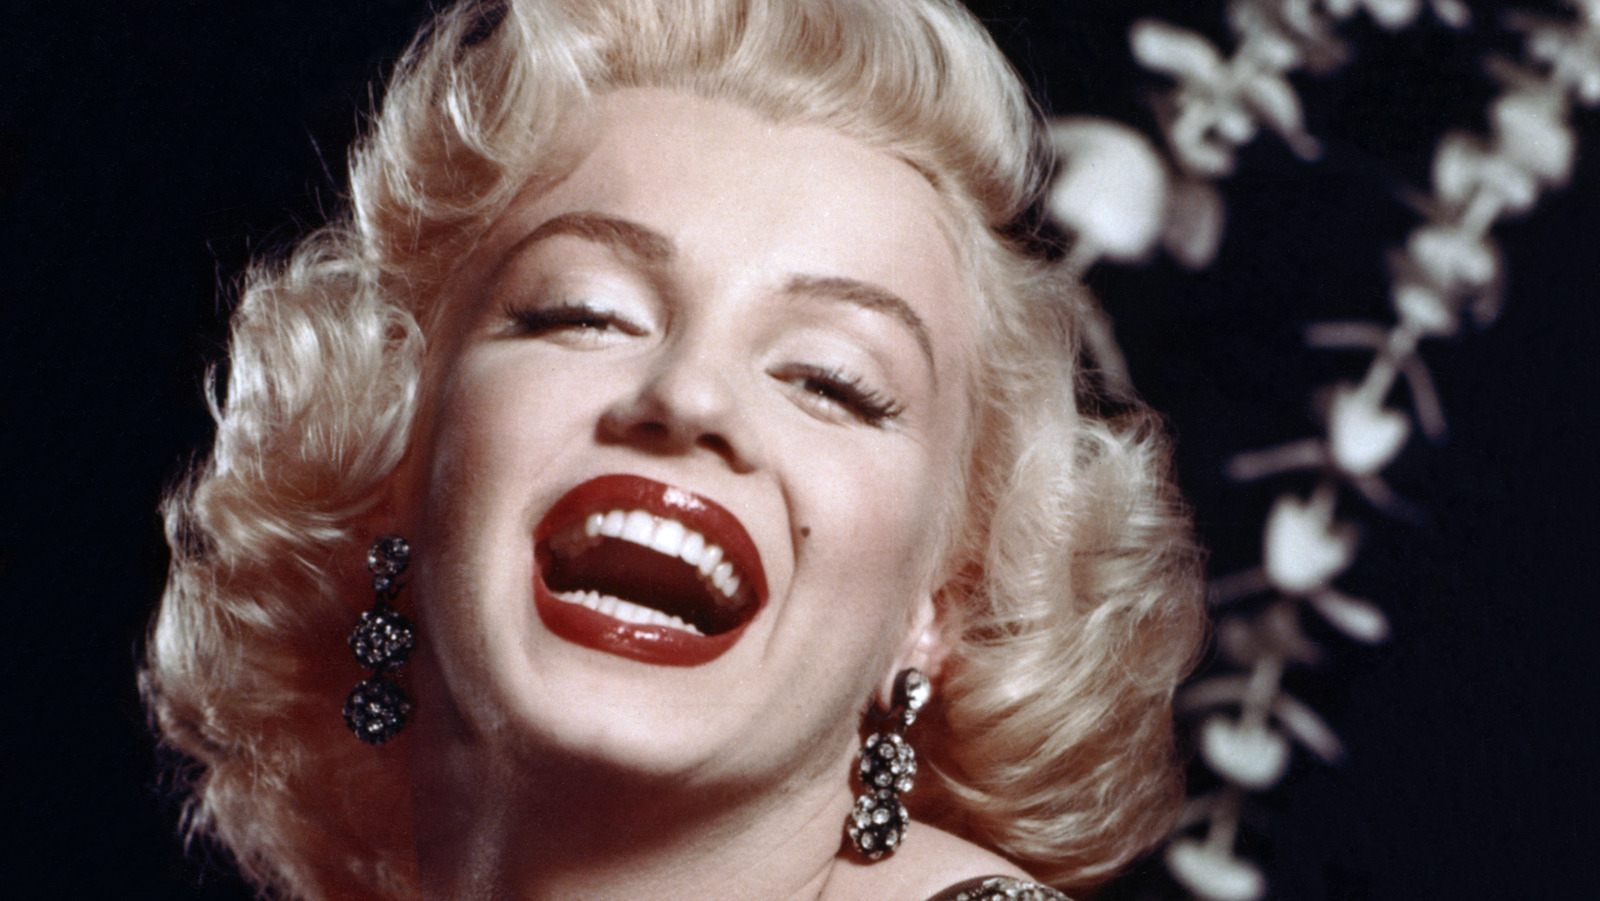 Marilyn Monroe's Net Worth At The Time Of Her Death Might Surprise You